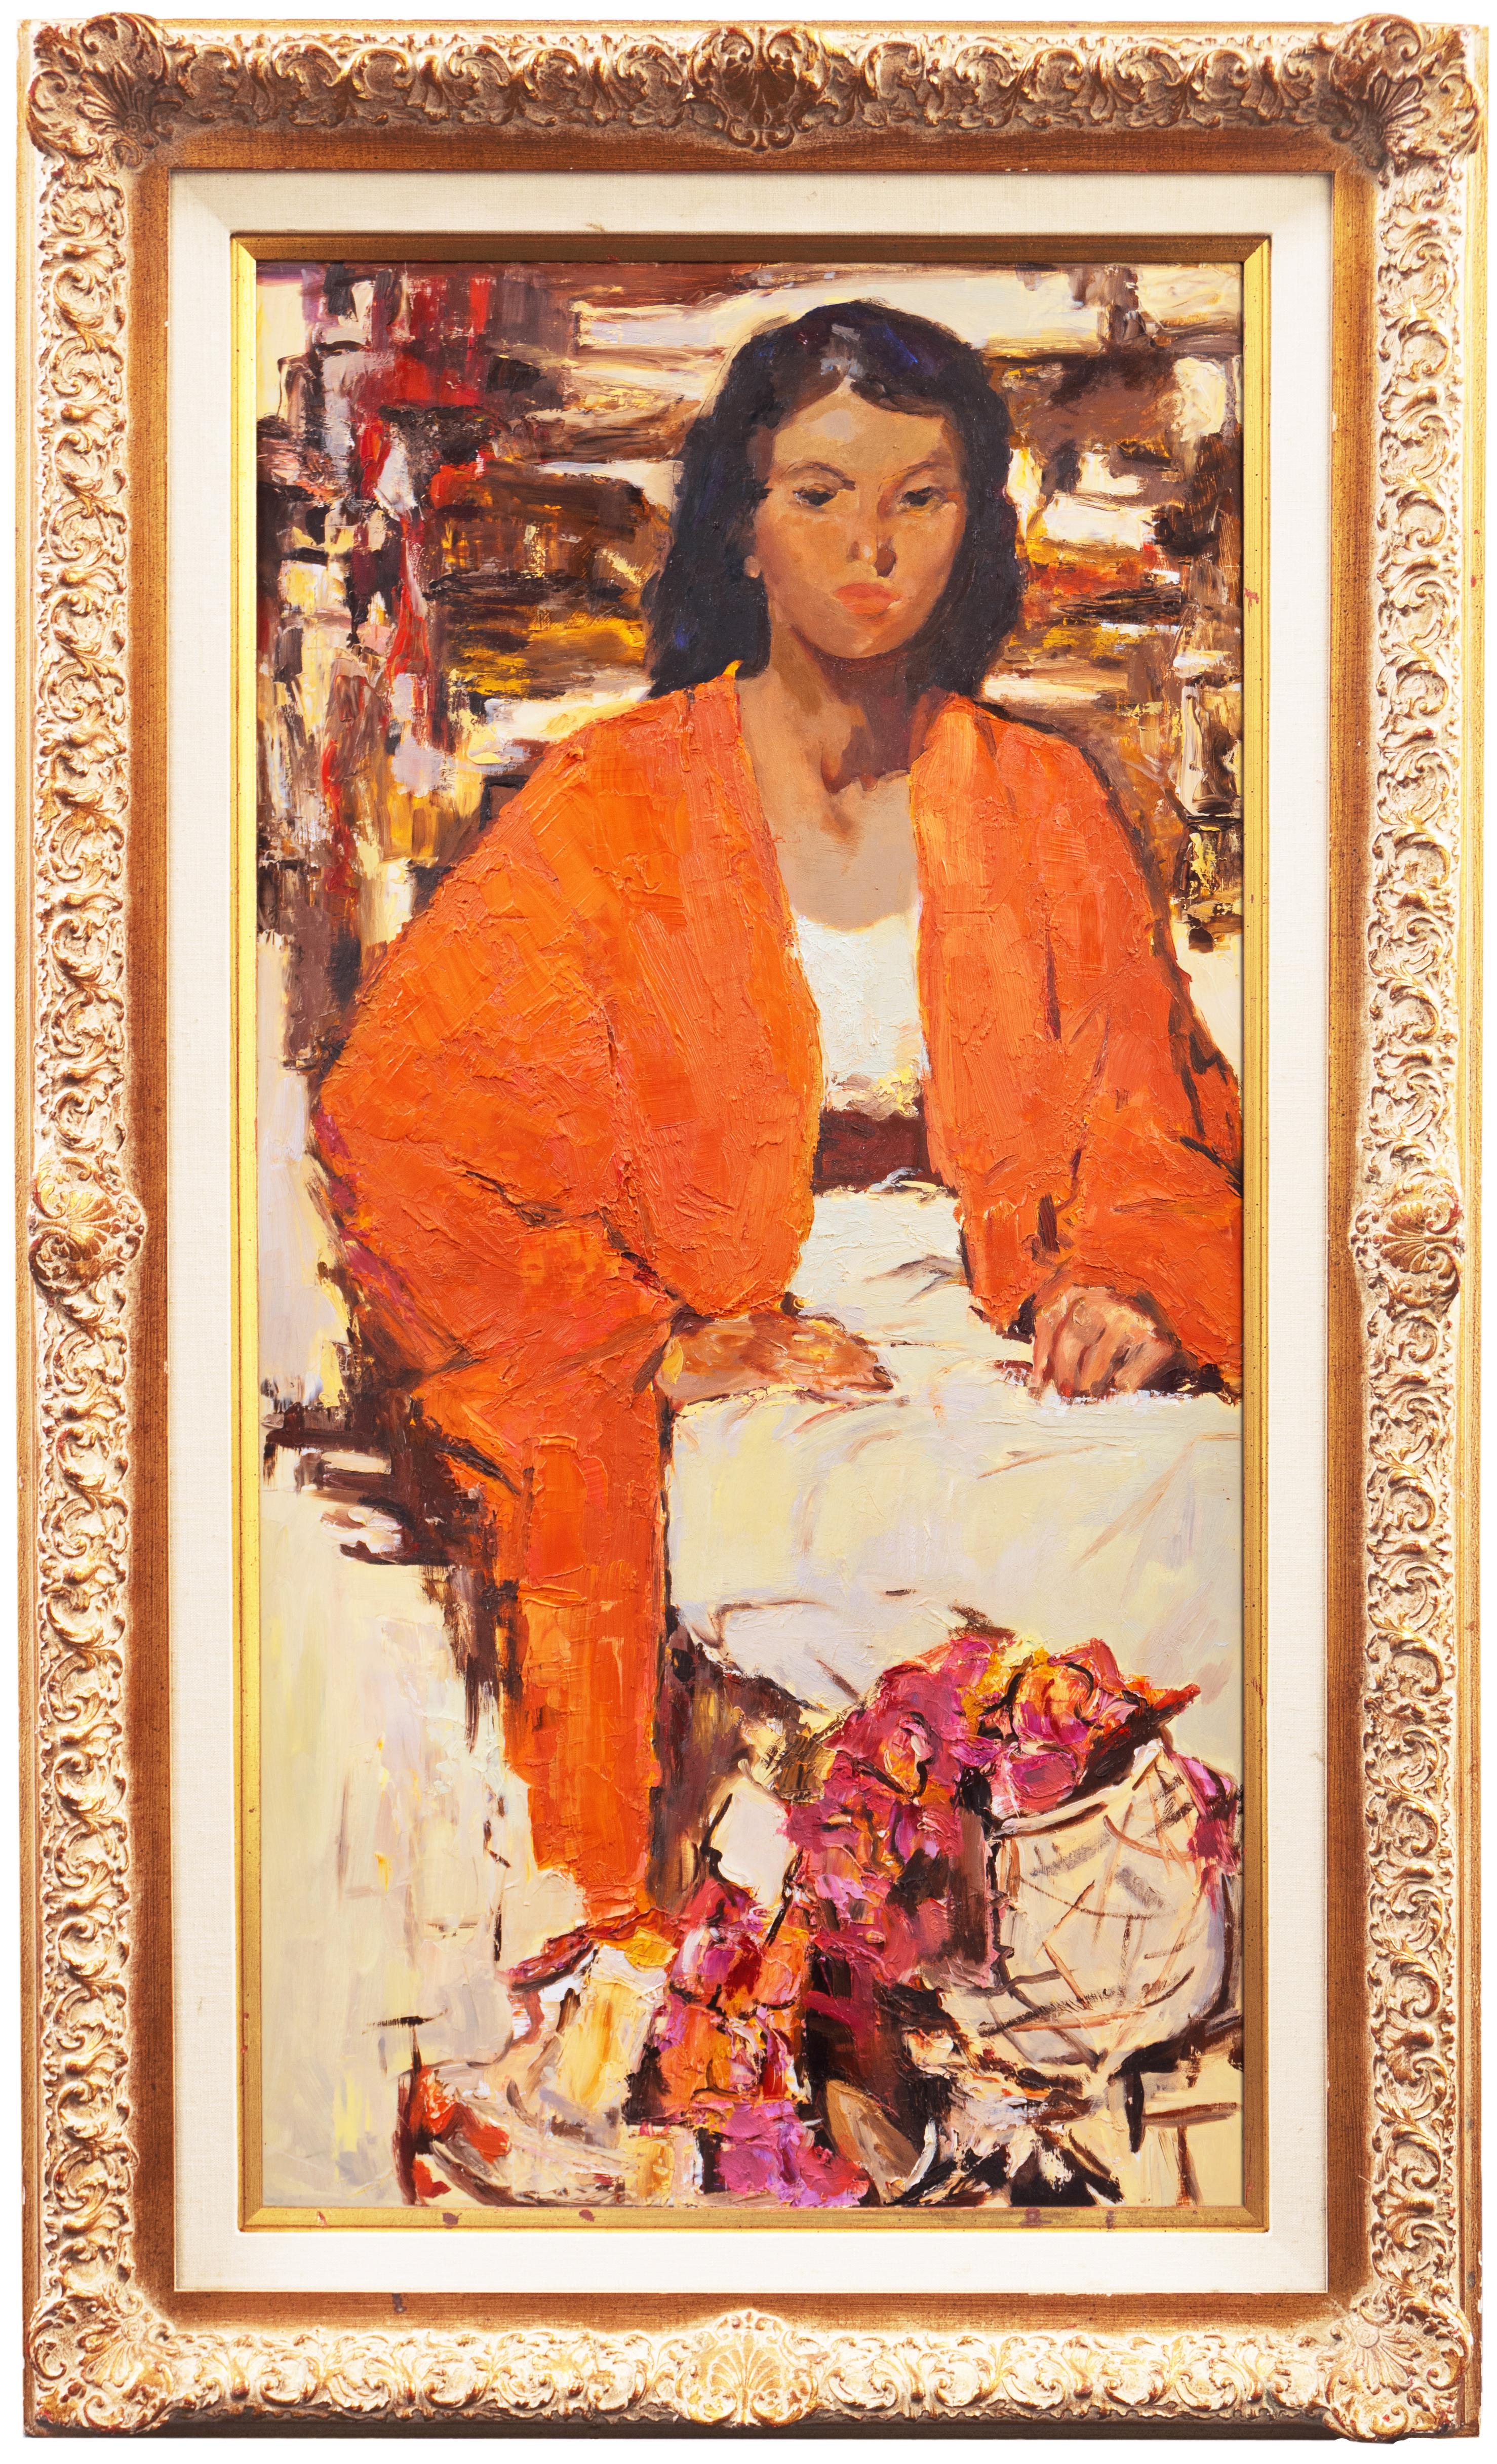 Unknown Figurative Painting - 'Woman in a Coral Jacket with Oleanders', Post-Impressionist Figural Oil, Fechin